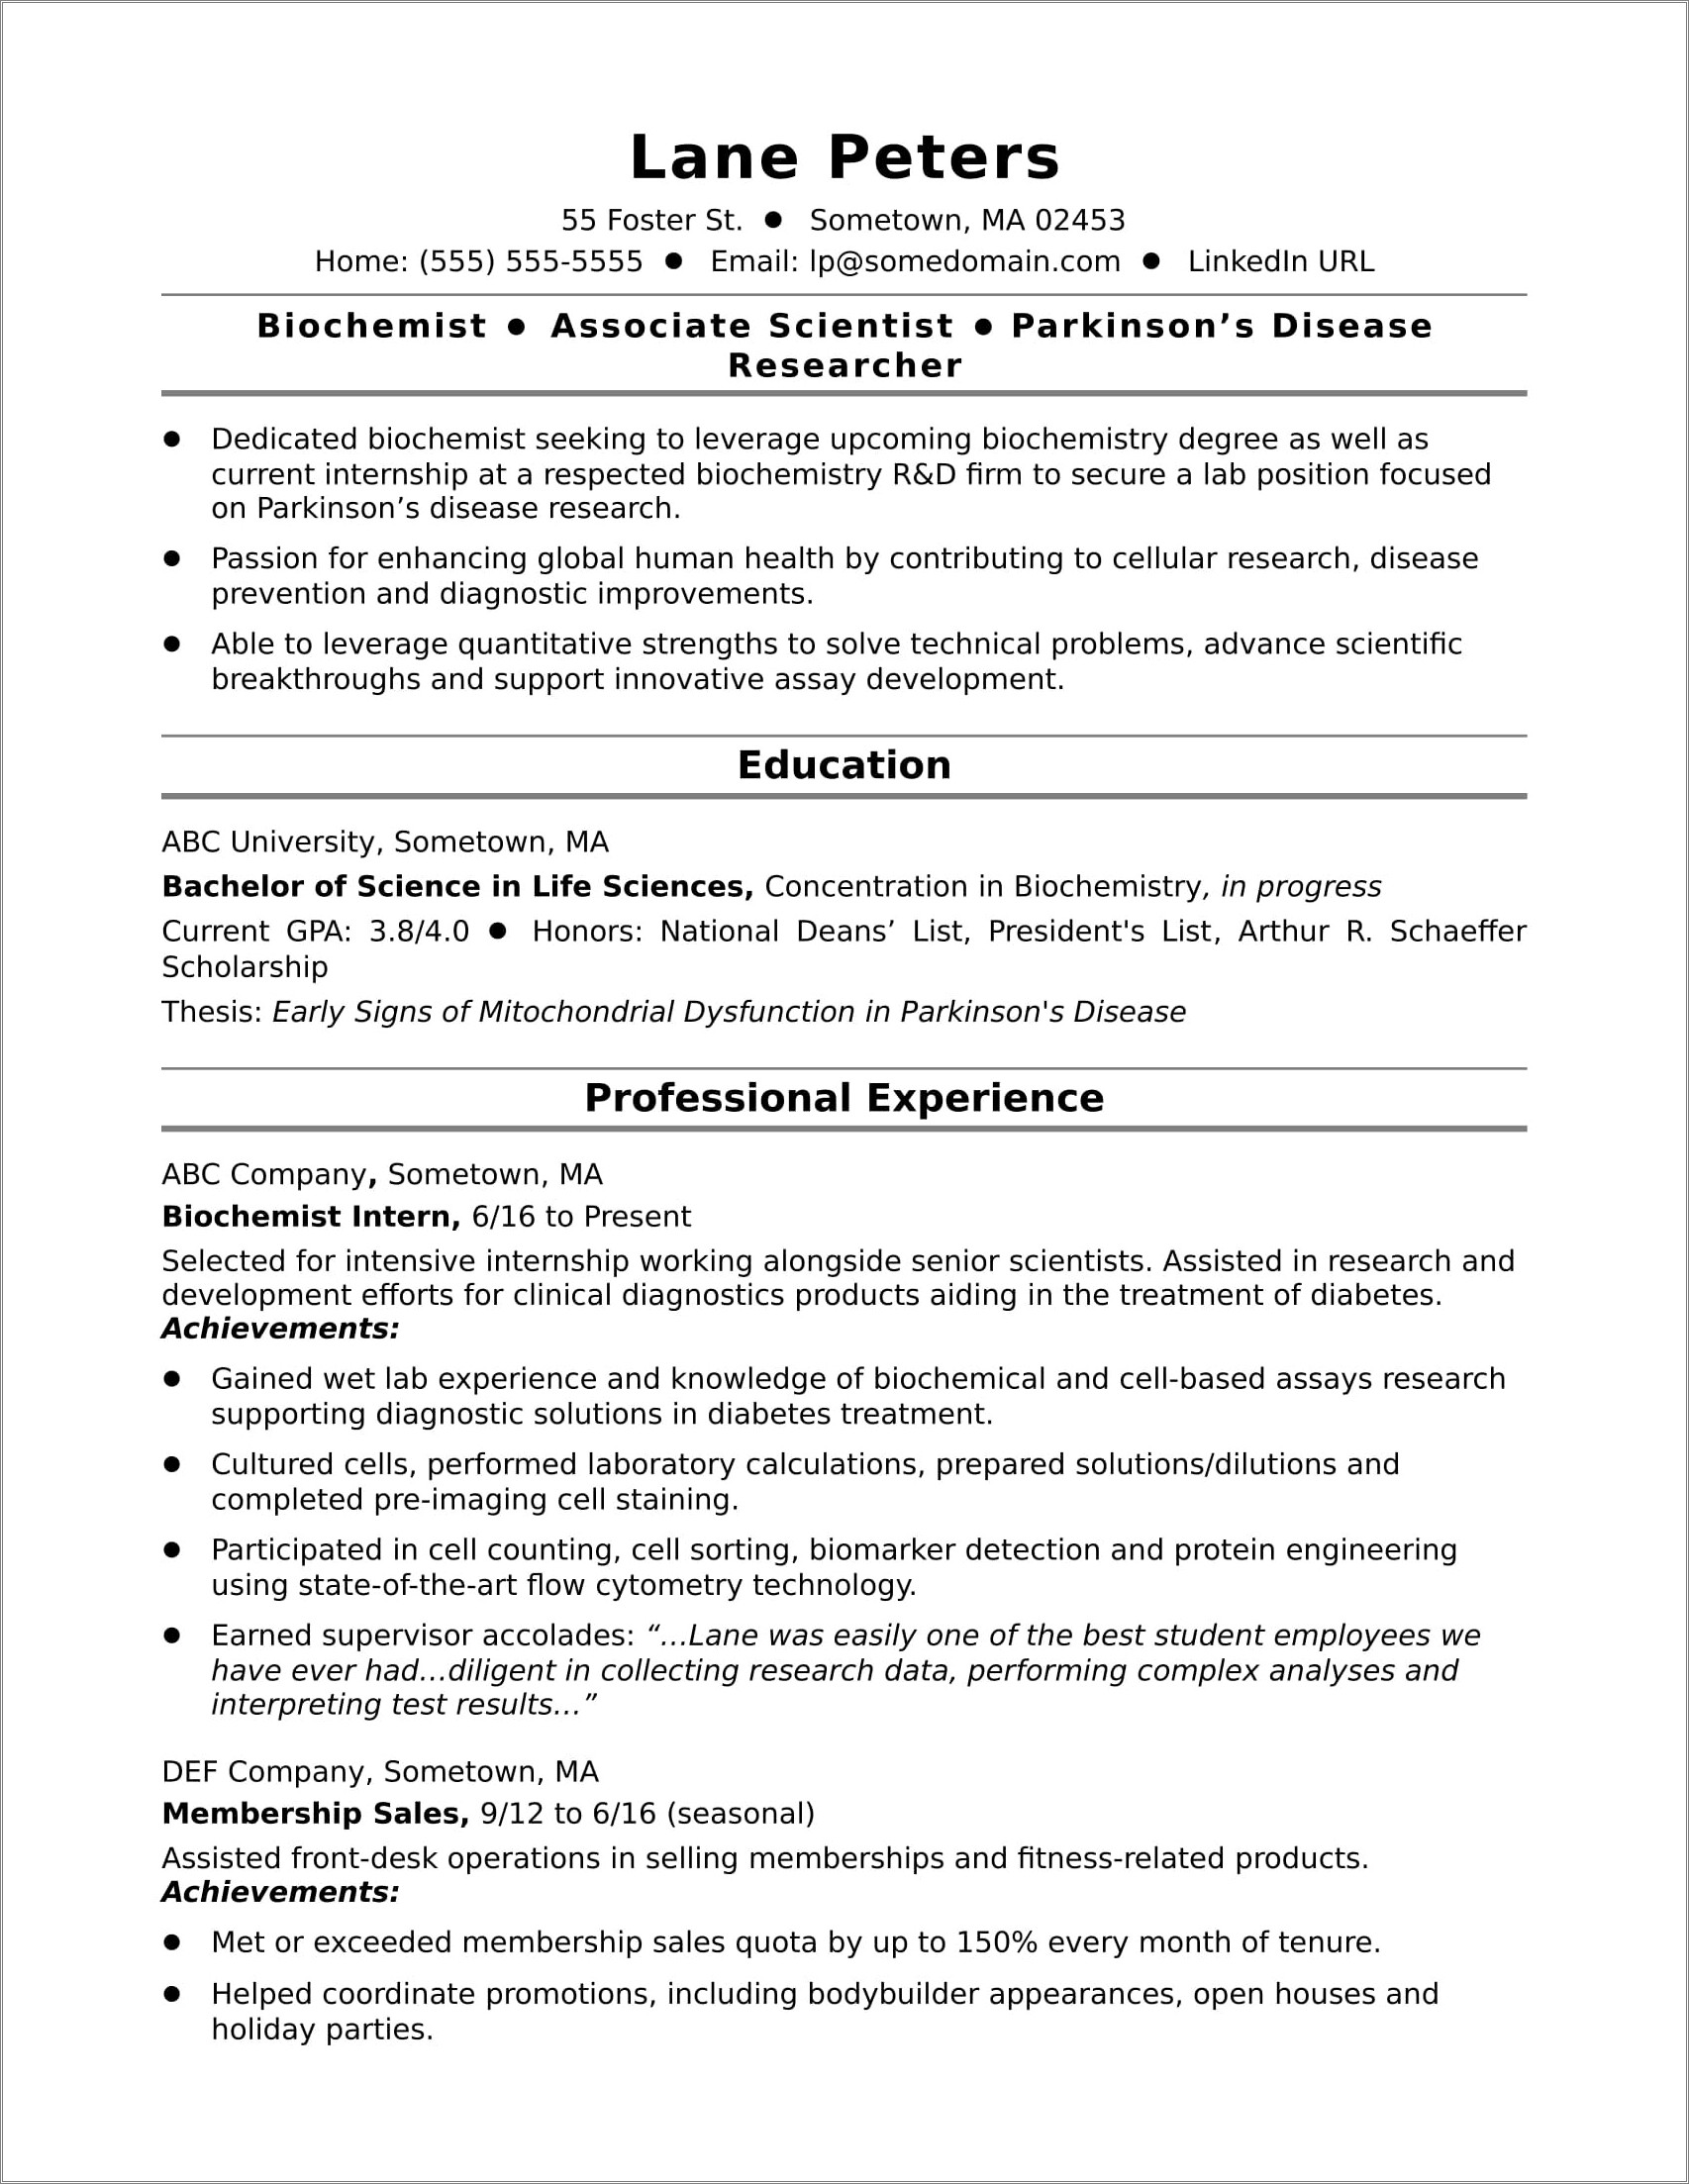 Resume Samples For Biotech Professionals